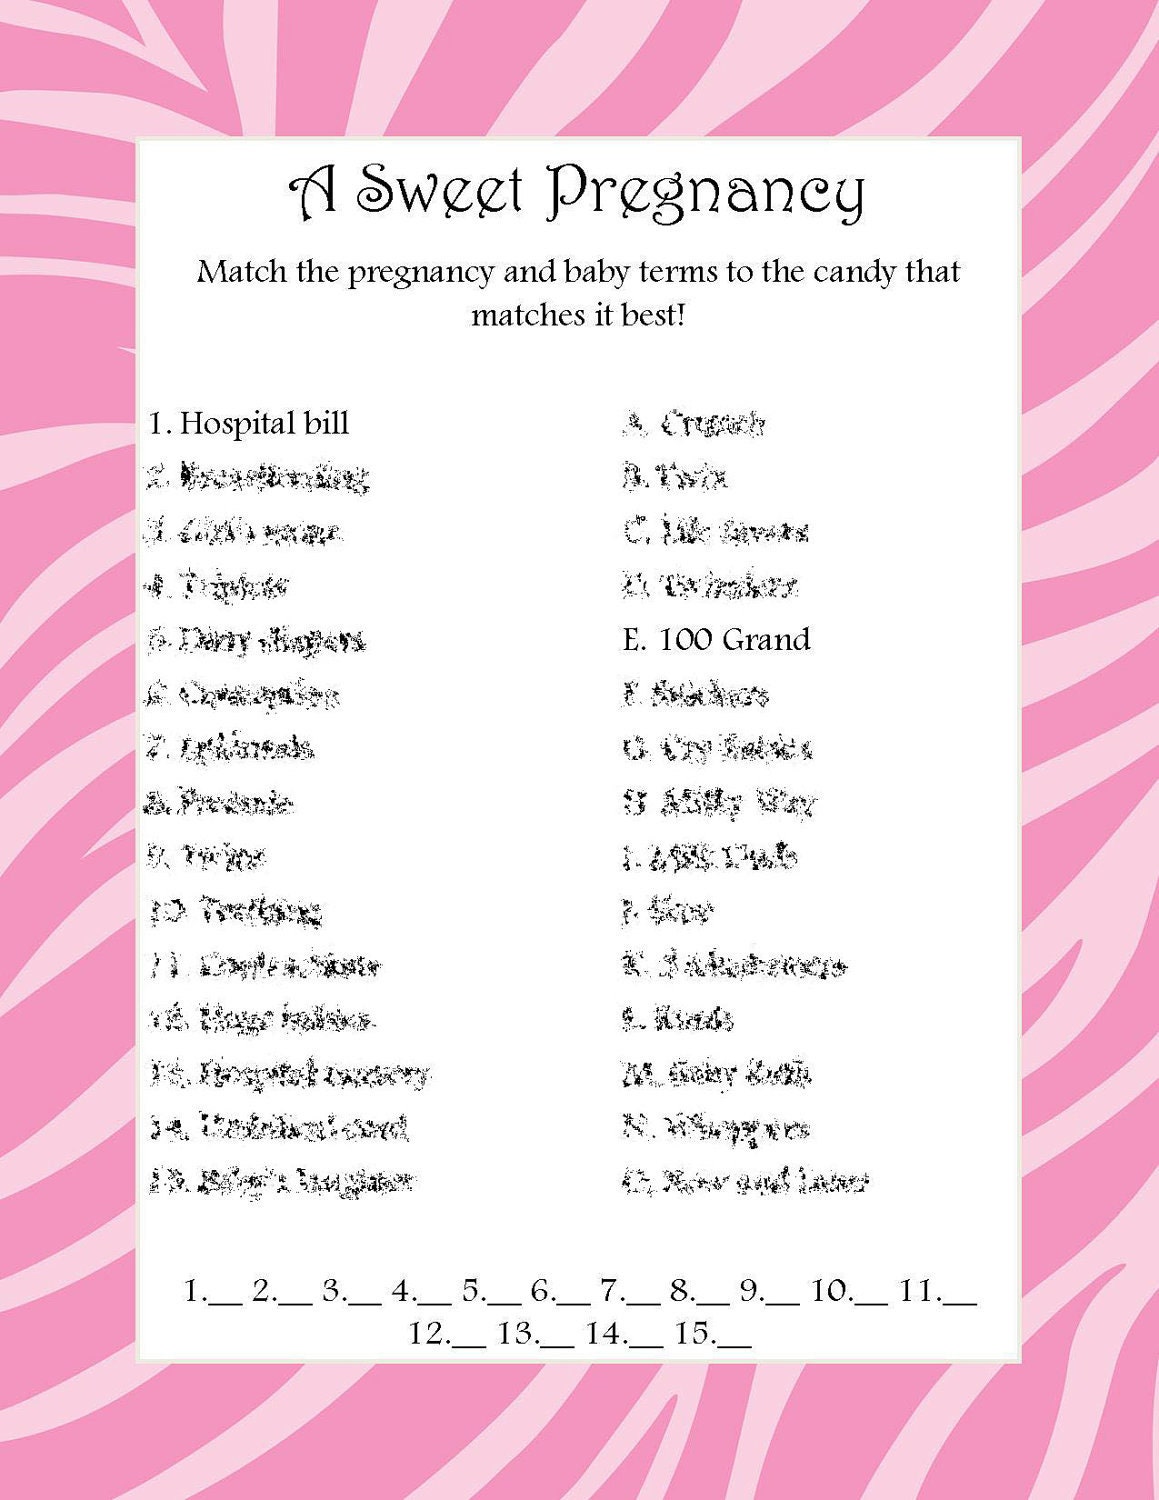 1 New baby shower game how sweet it is answer key 983 Sweet Pregnancy Baby Shower Game Pink by craftygirlcreationz 